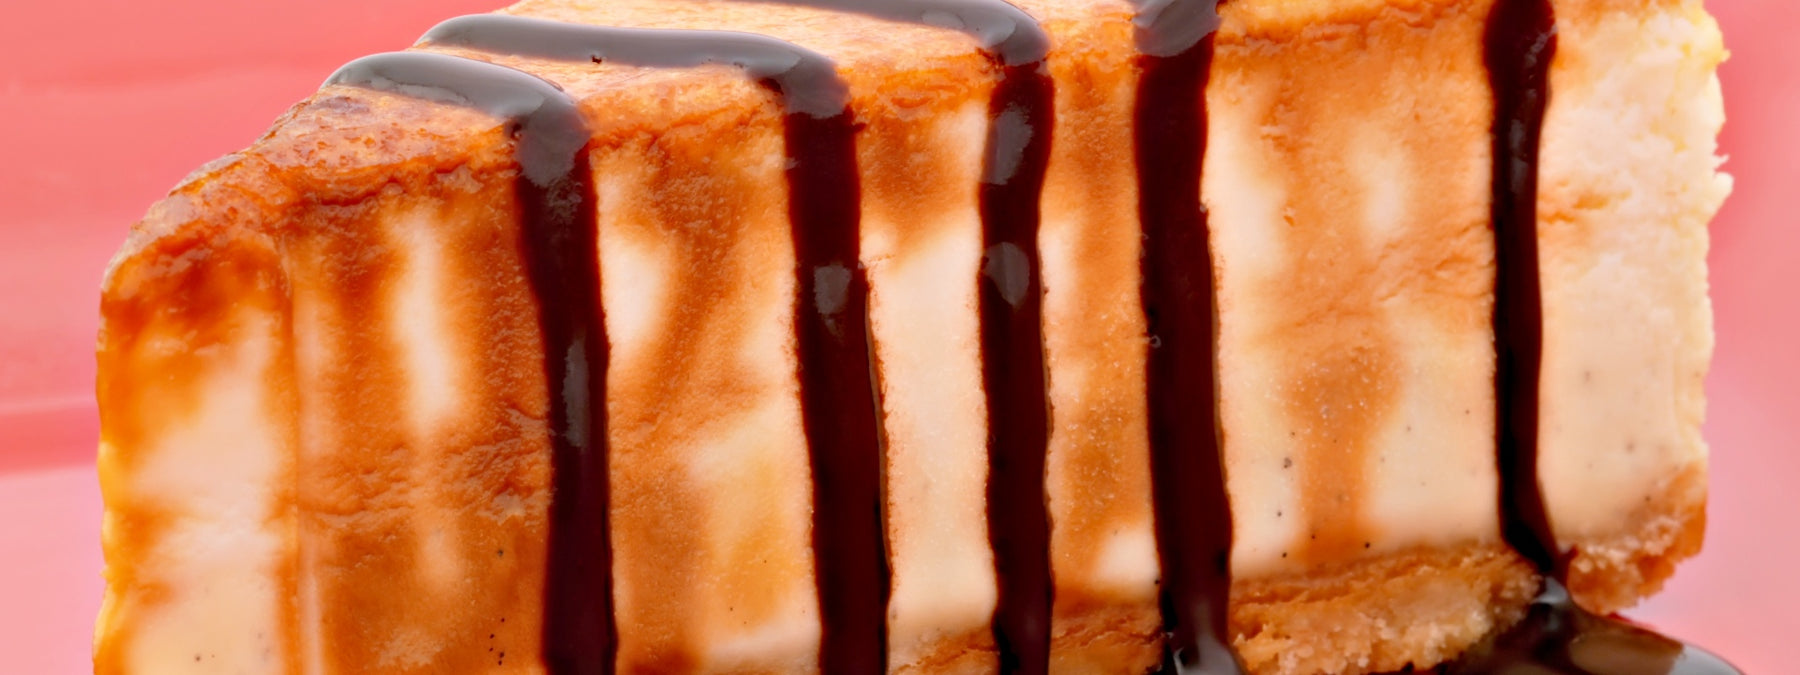 High Protein Caramel Cake Recipe With a Chocolate Cream Cheese Filling